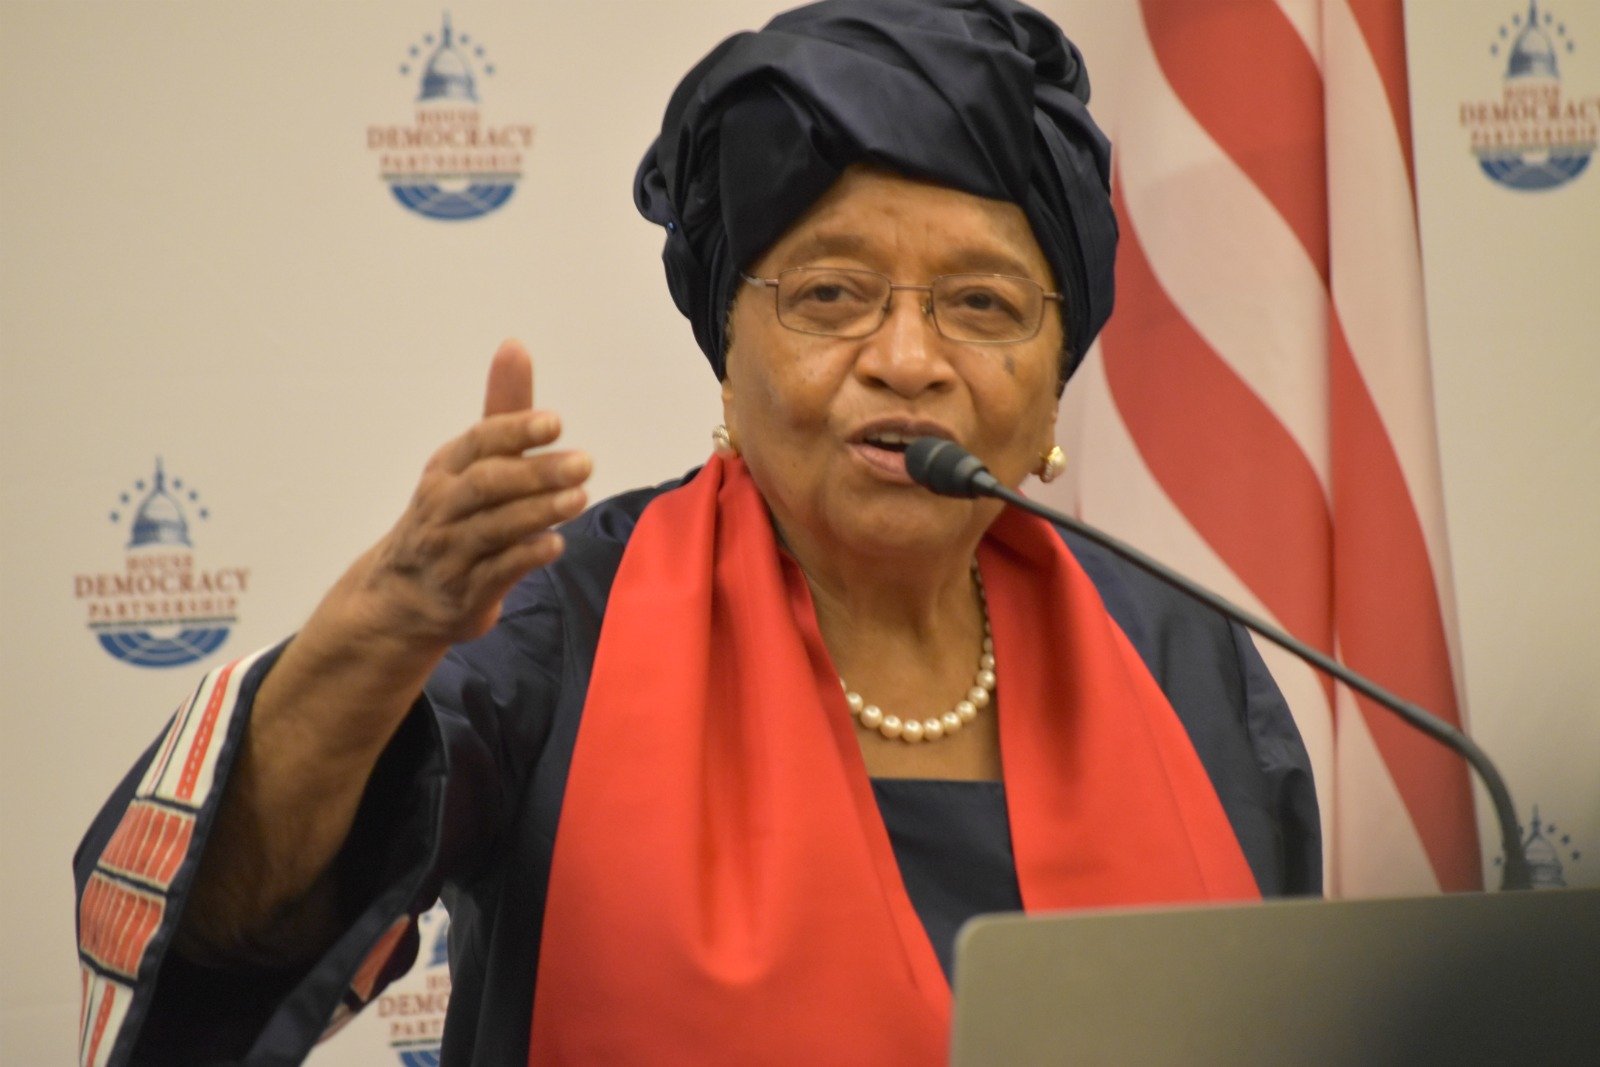 Honoring a Legacy of Democracy and Peace in Liberia